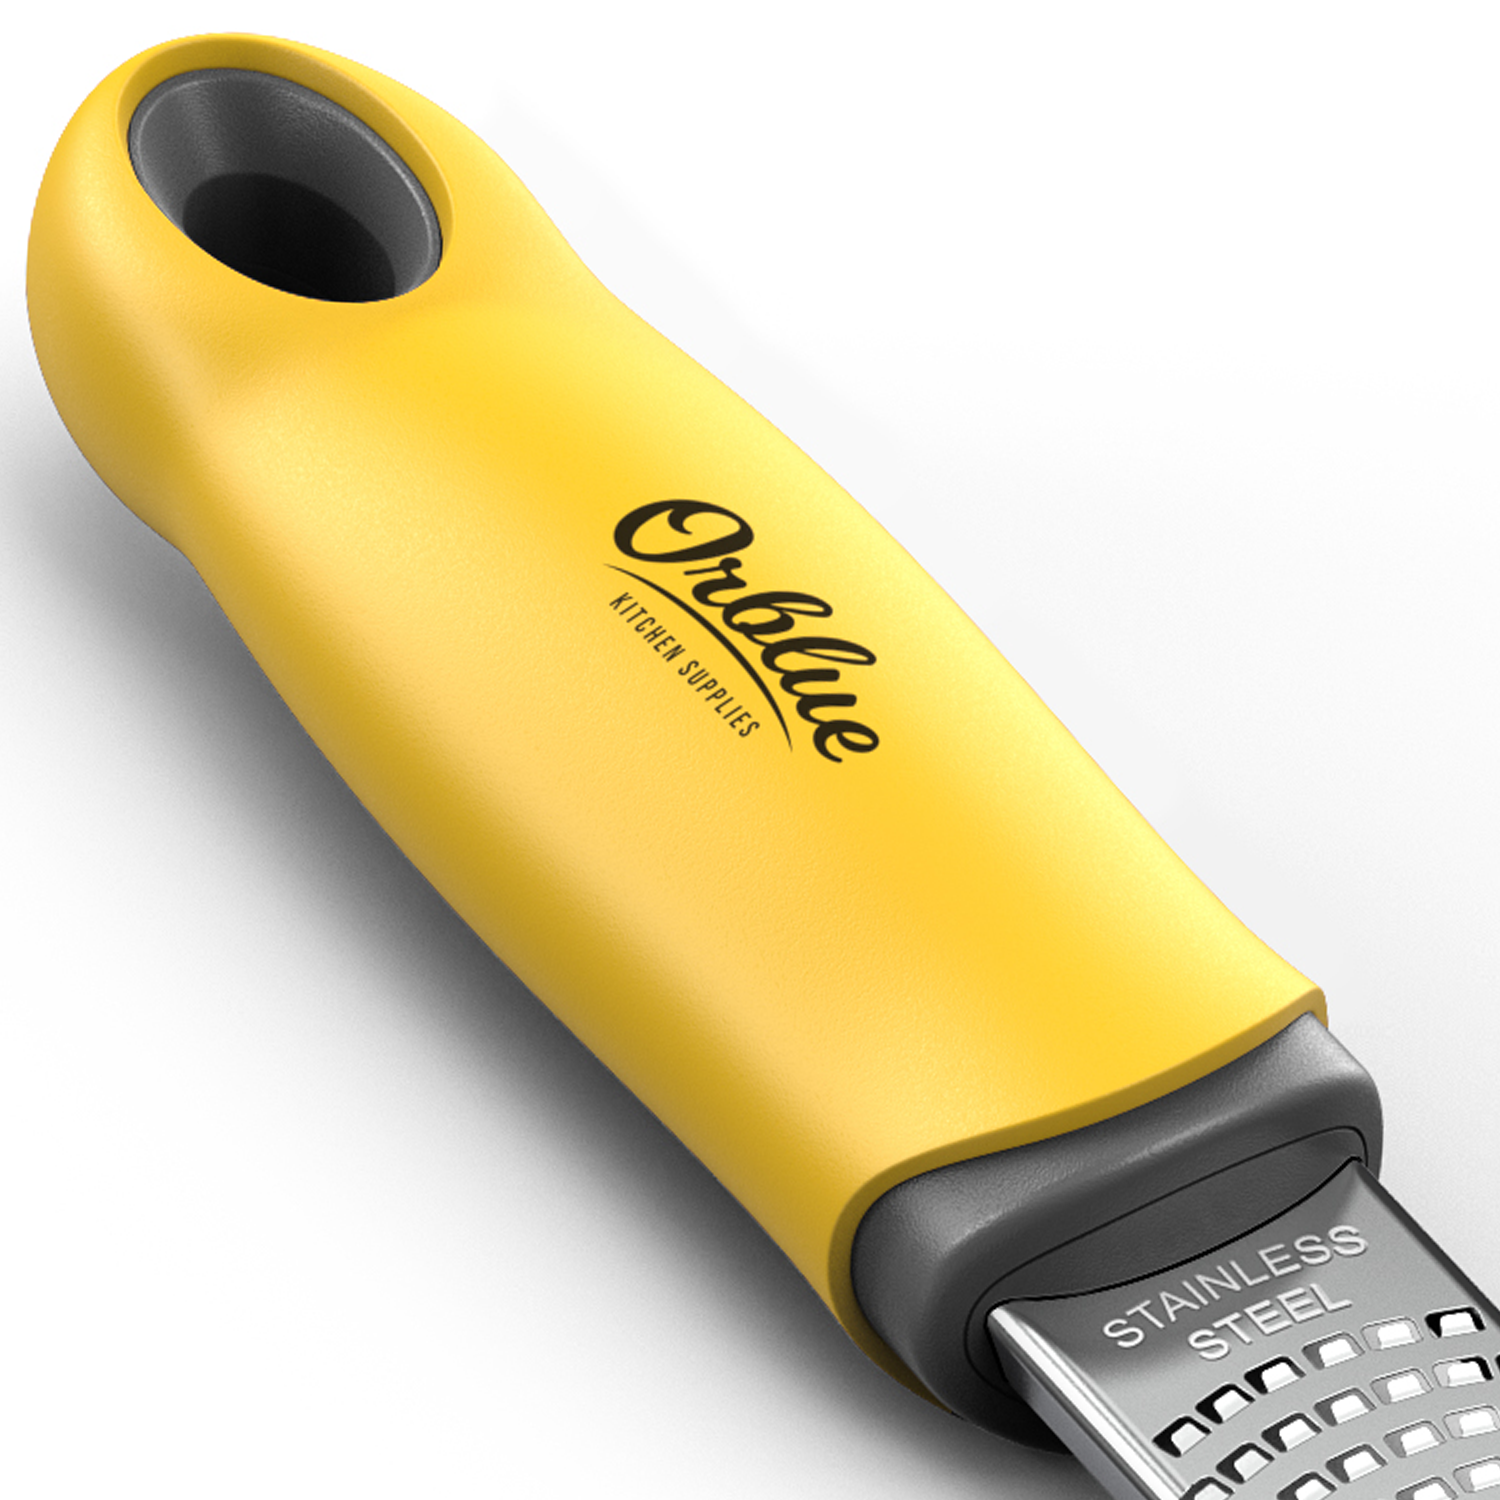 DI ORO Hand Held Cheese Grater & Lemon Zester Set – Kitchen Cheese Grater  with Handle Stainless Steel & Fine Citrus Zester Grater for Cooking &  Baking